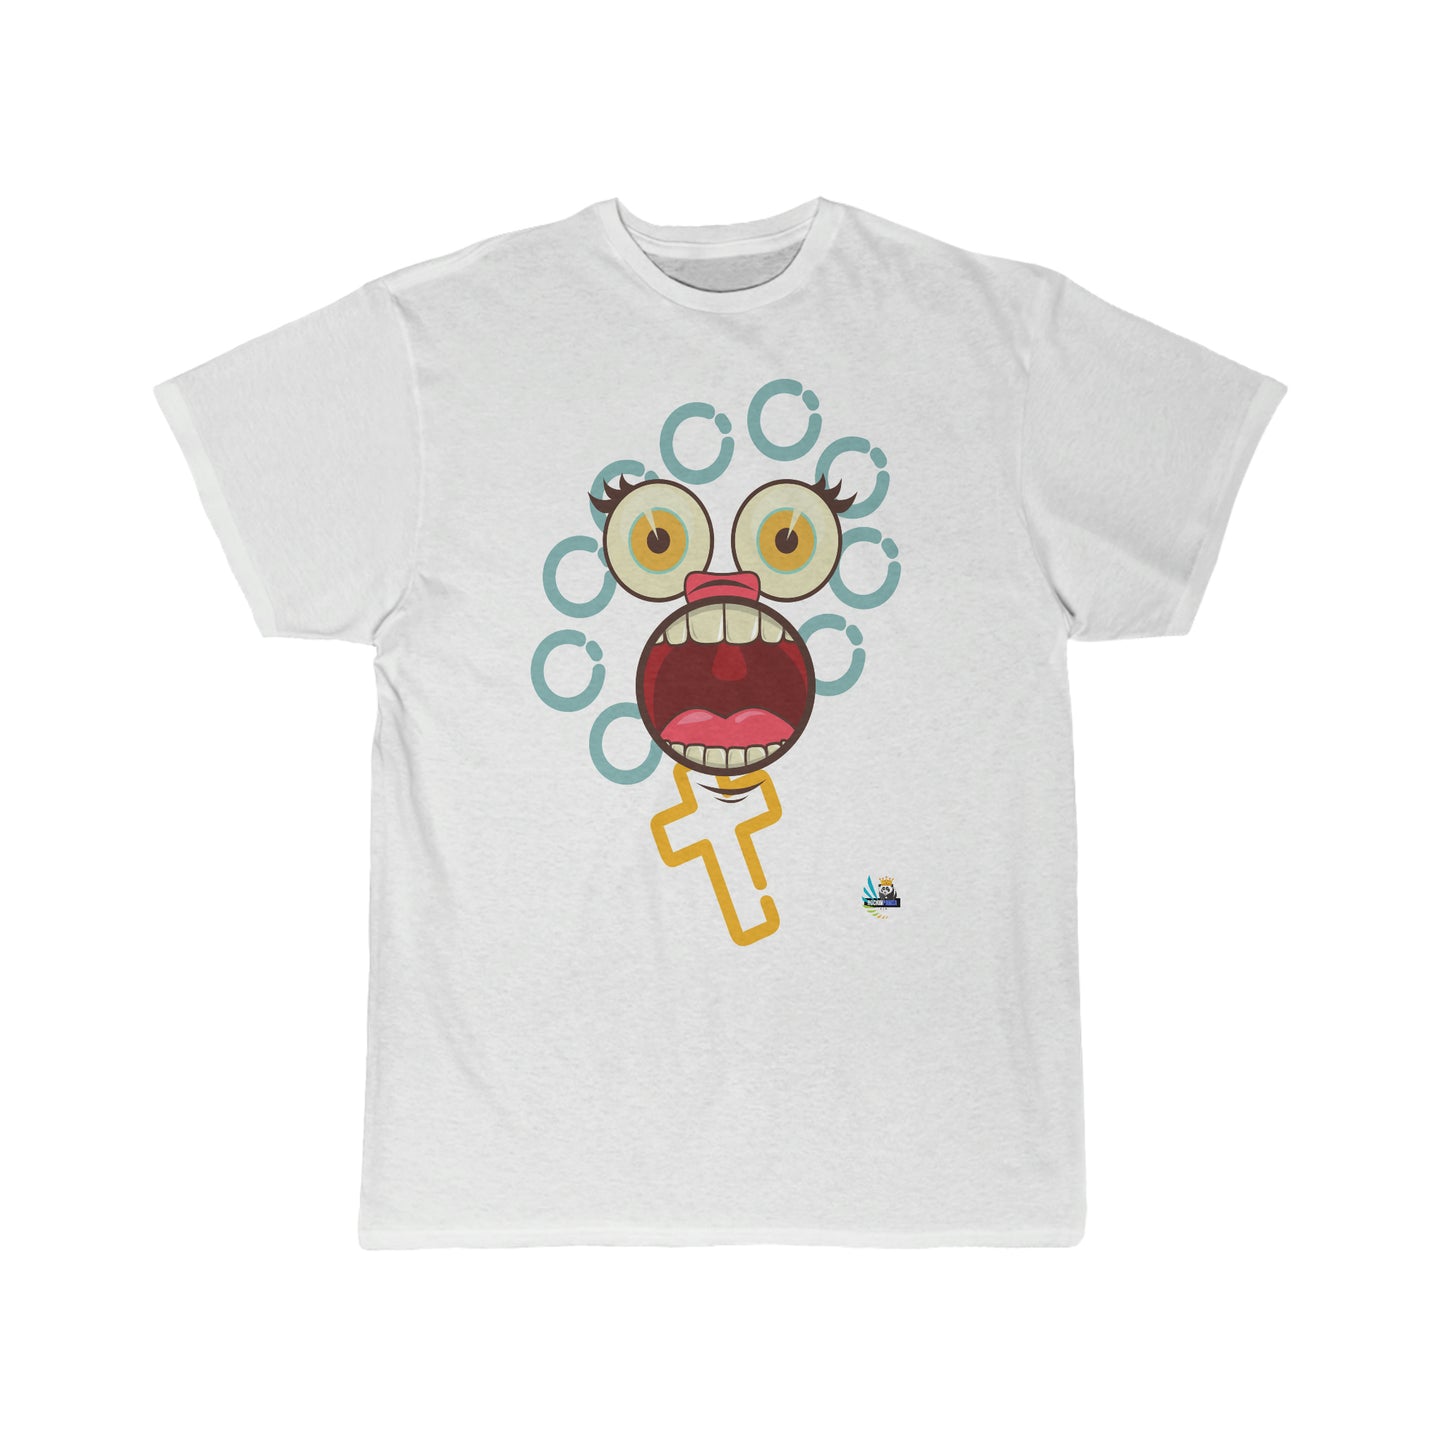 Oh My Gawd! Softstyle Tee